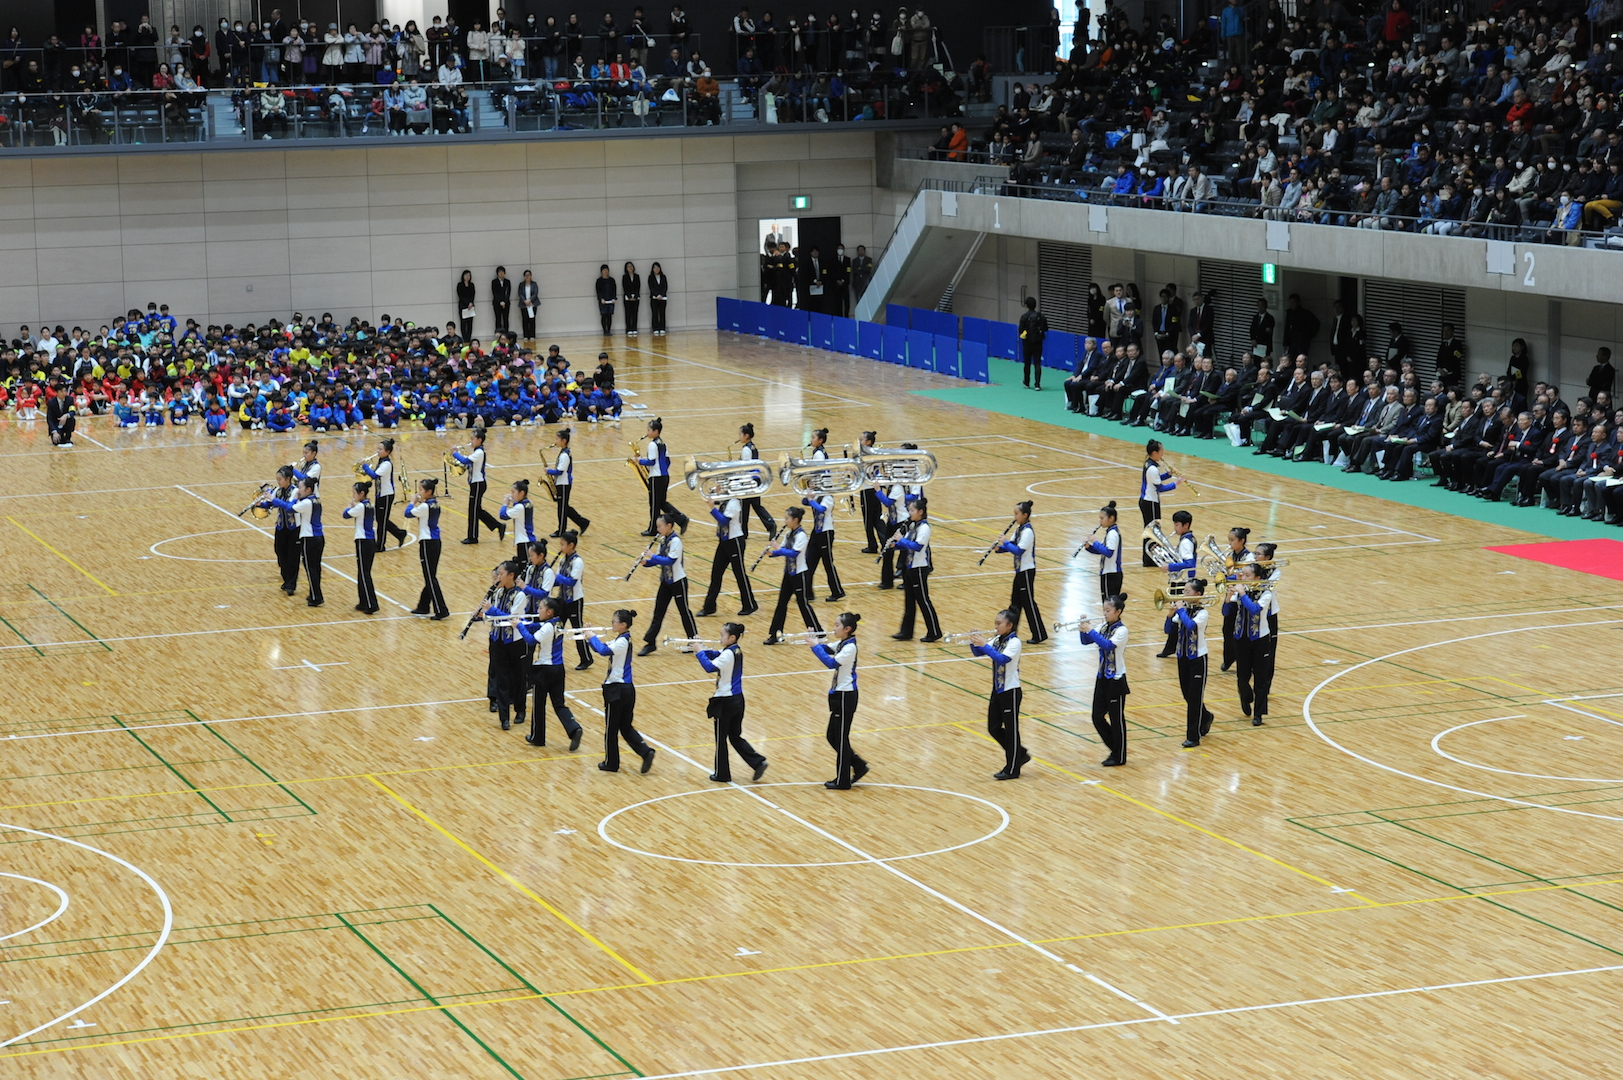 Takasaki Arena Opening Ceremony<br />Performed by<br />The Tsukasawa Junior High School Marching Band 1